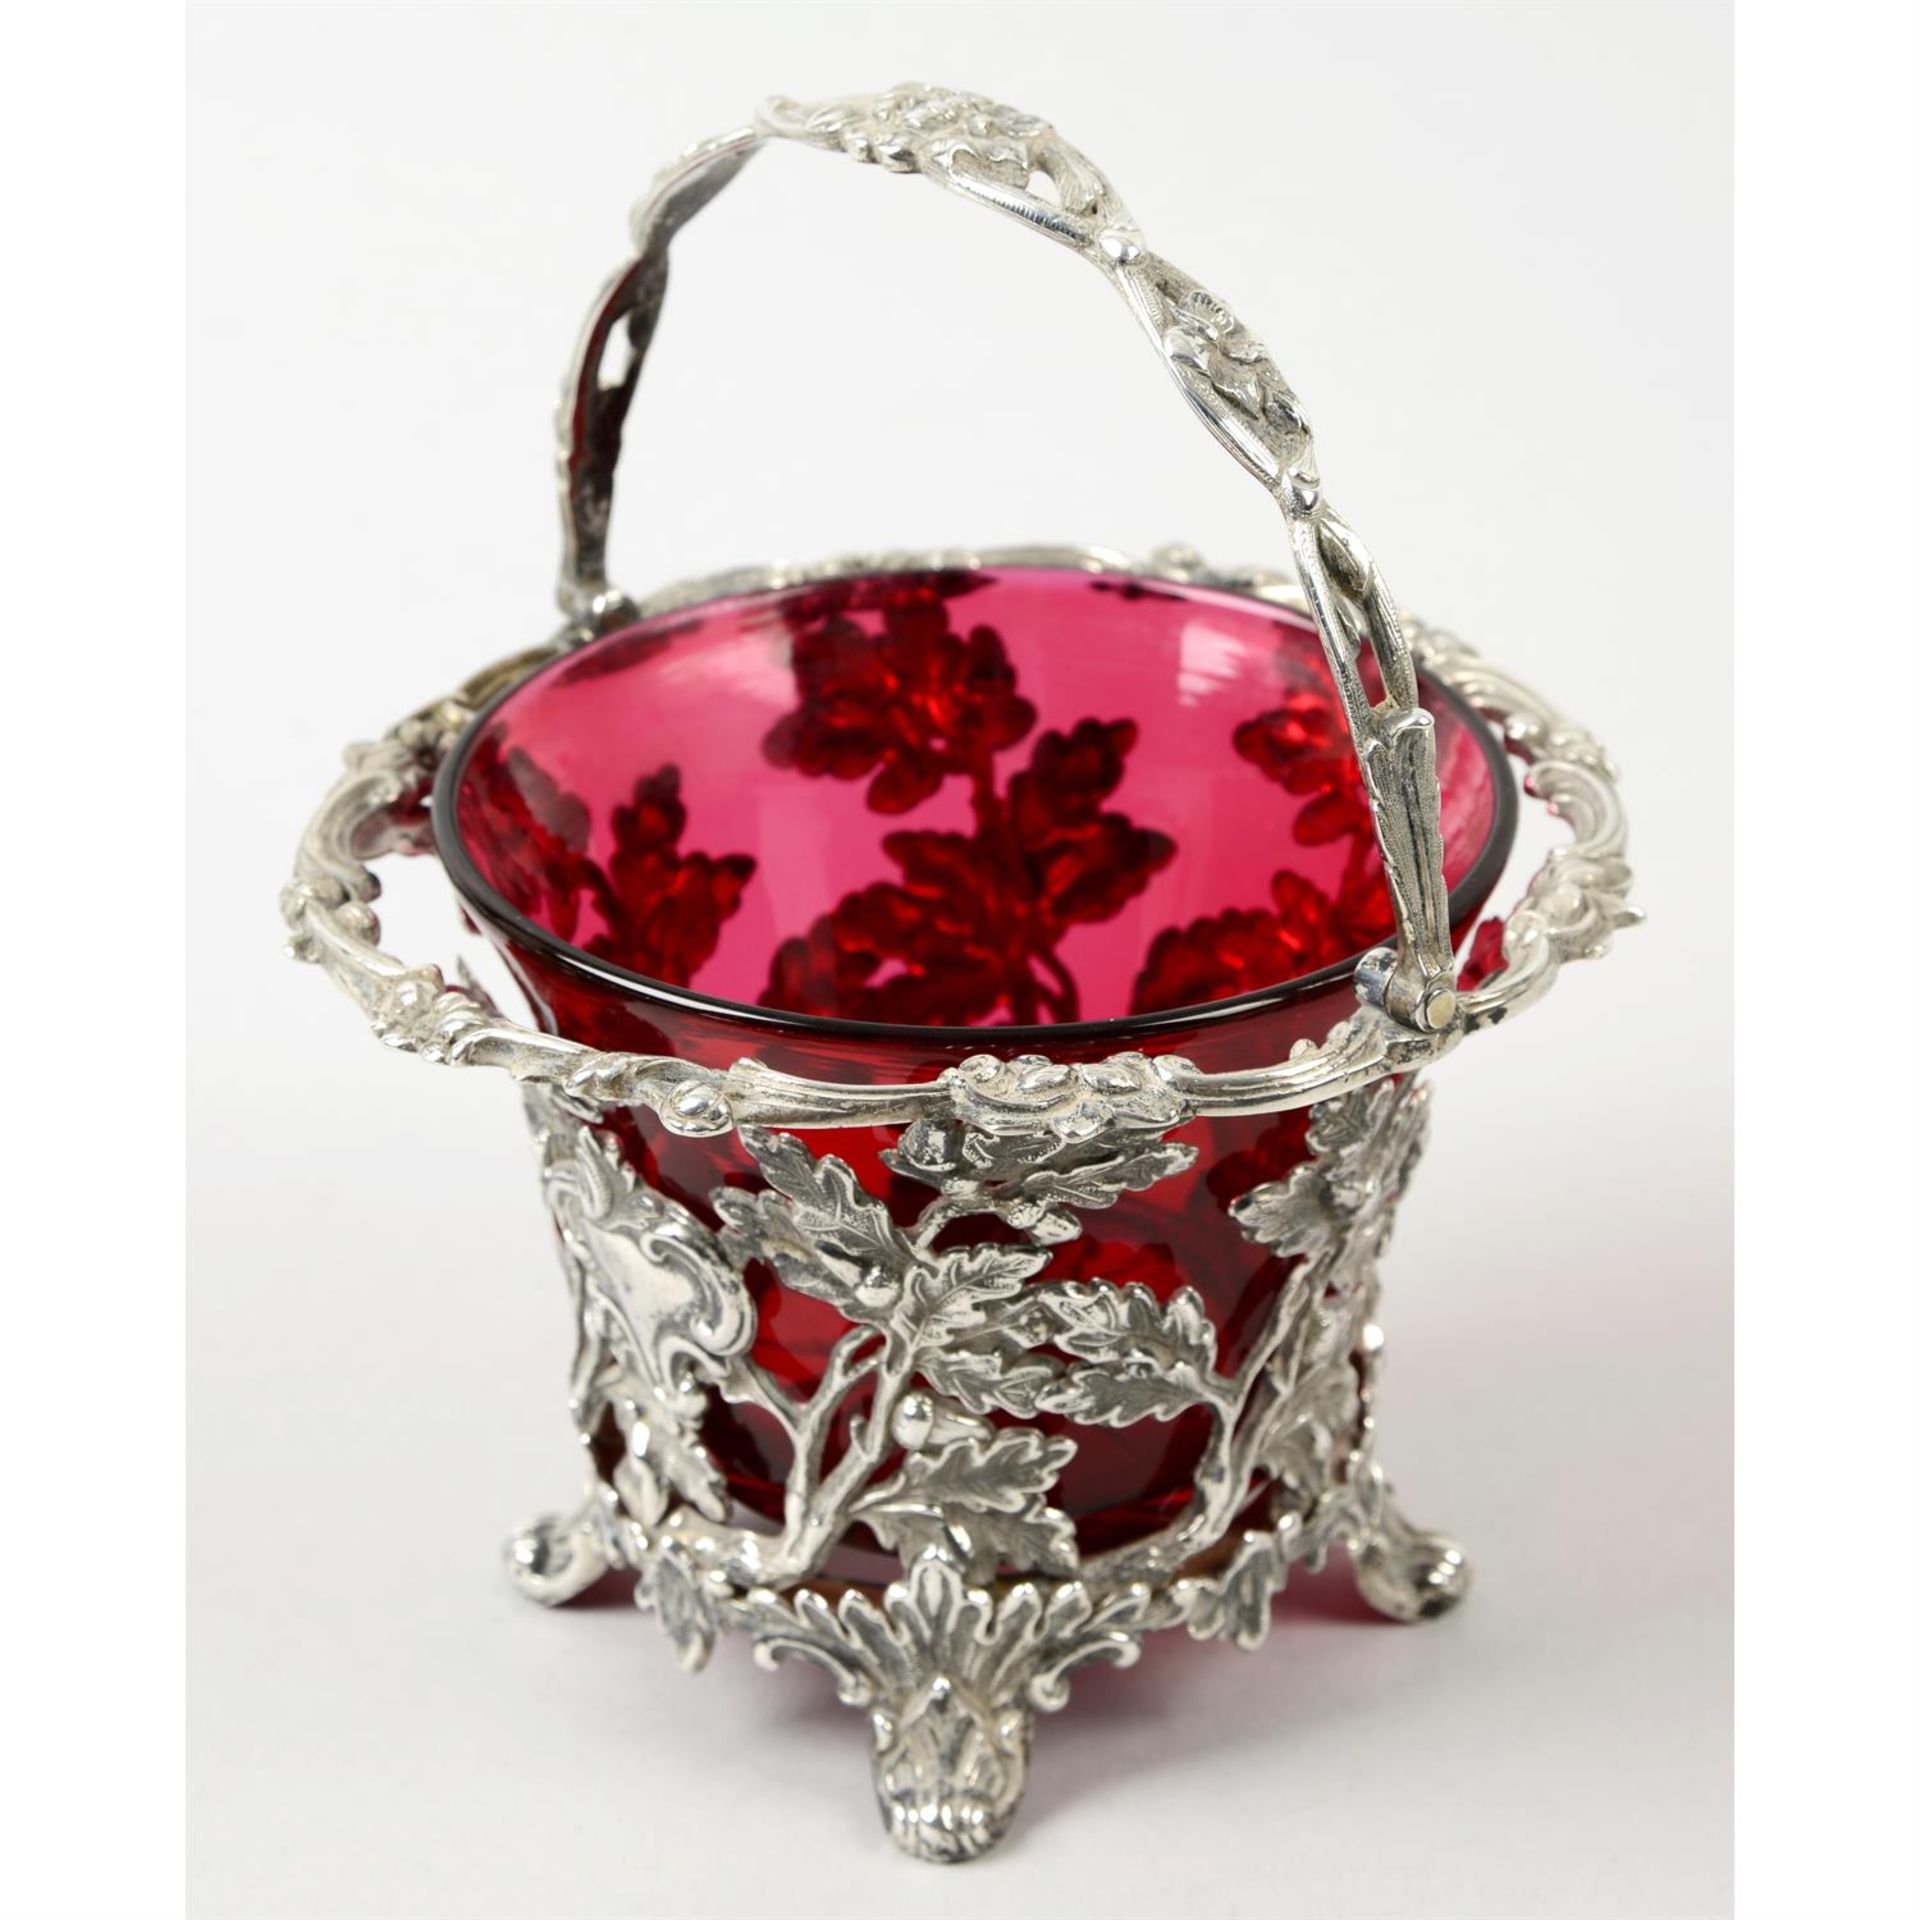 A Victorian pierced silver sugar basket with cranberry glass liner.